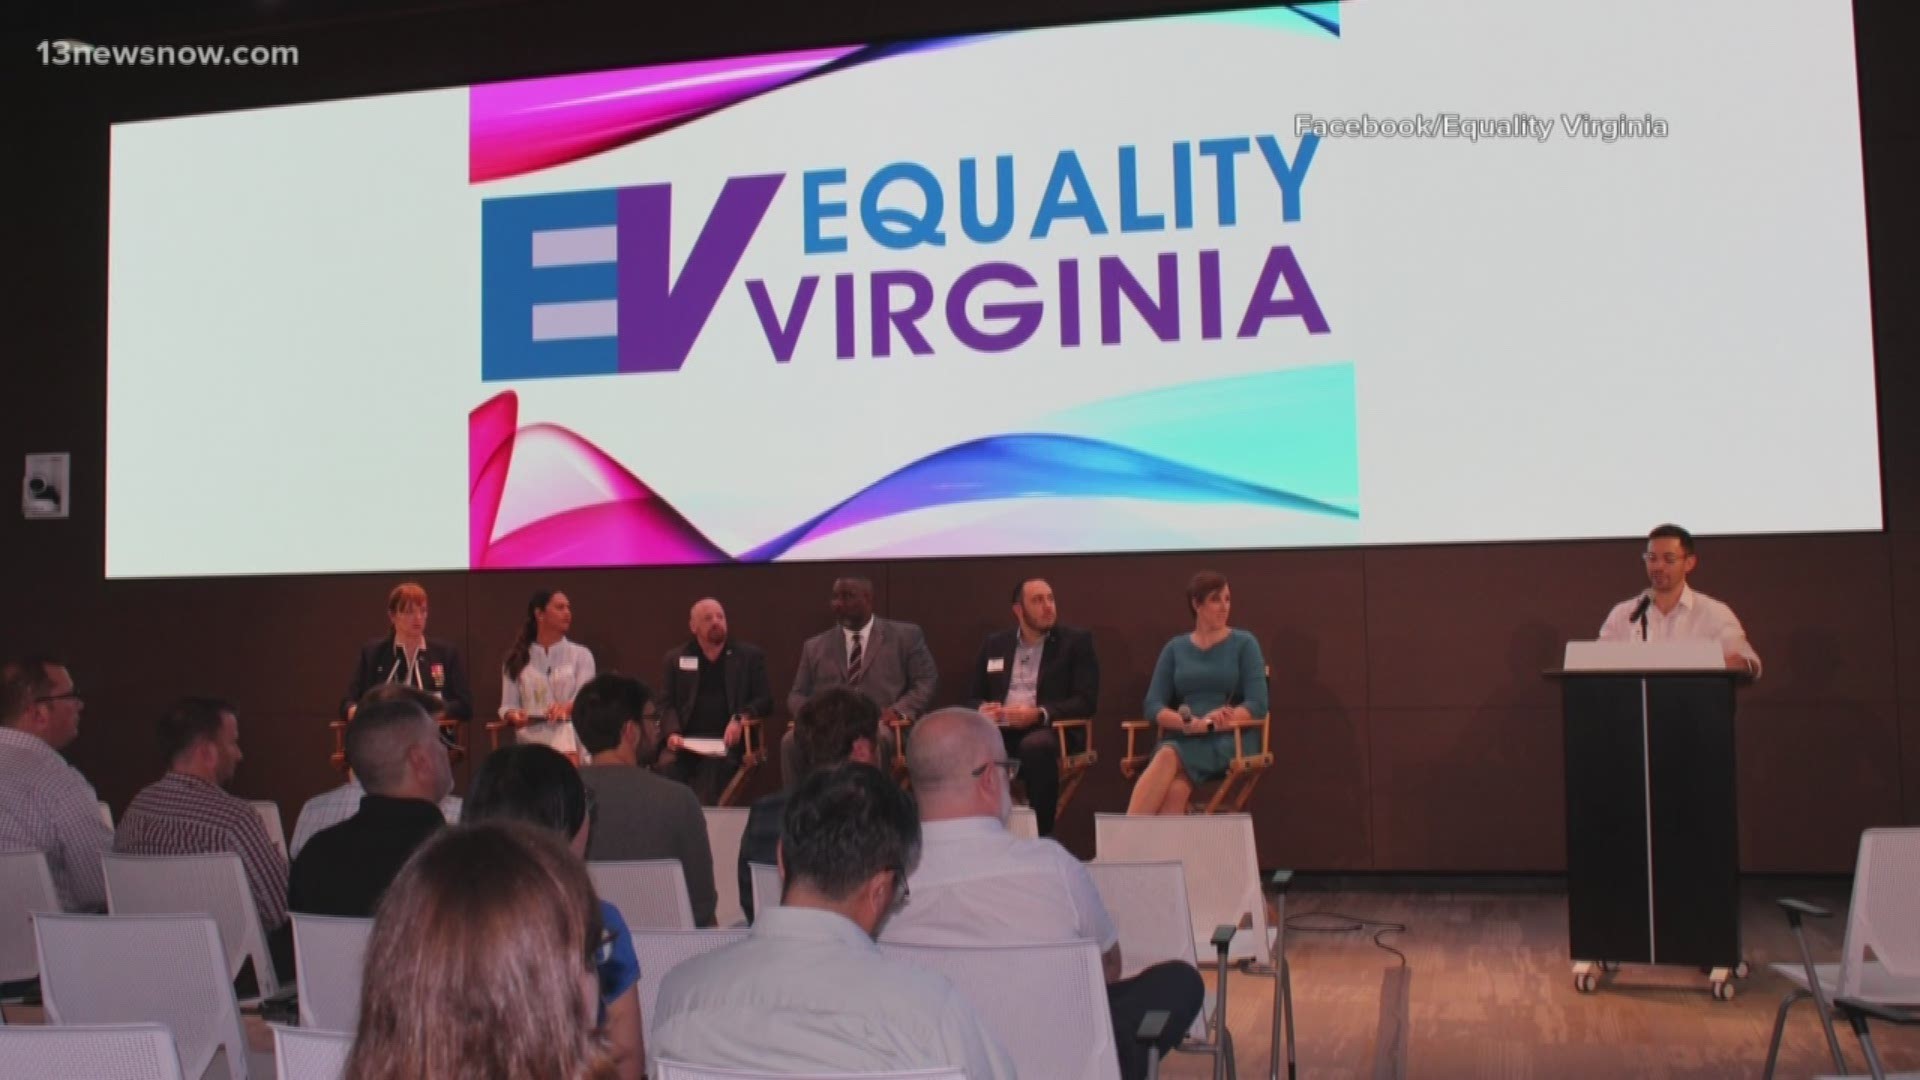 Equality Virginia is hosting 'Ask a Transperson.' It's a panel to increase familiarity and understanding of the transgender community.